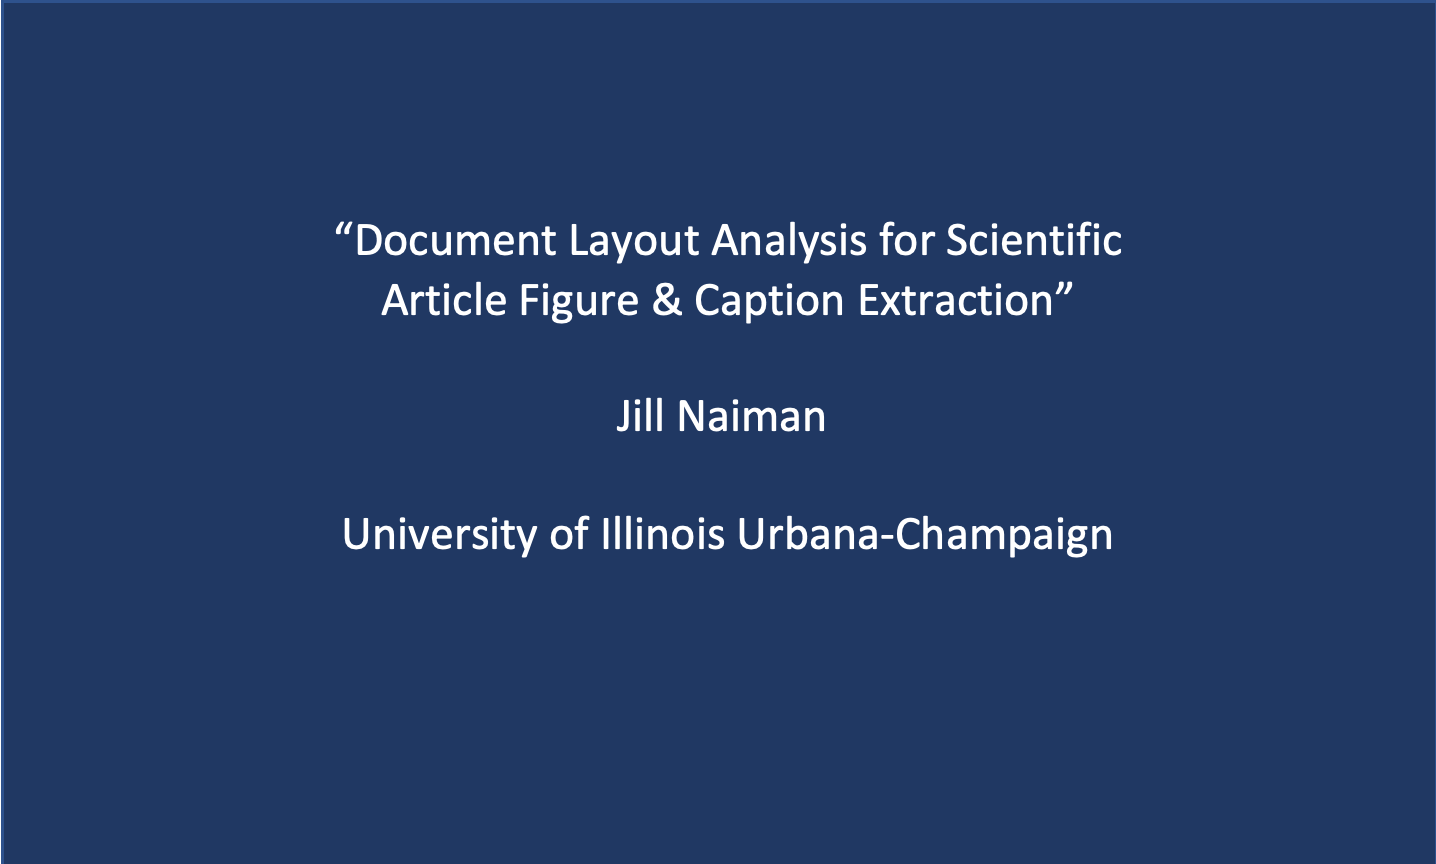 Workshop 5: Jill Naiman, ‘Document Layout Analysis for Scientific Article Figure & Caption Extraction’